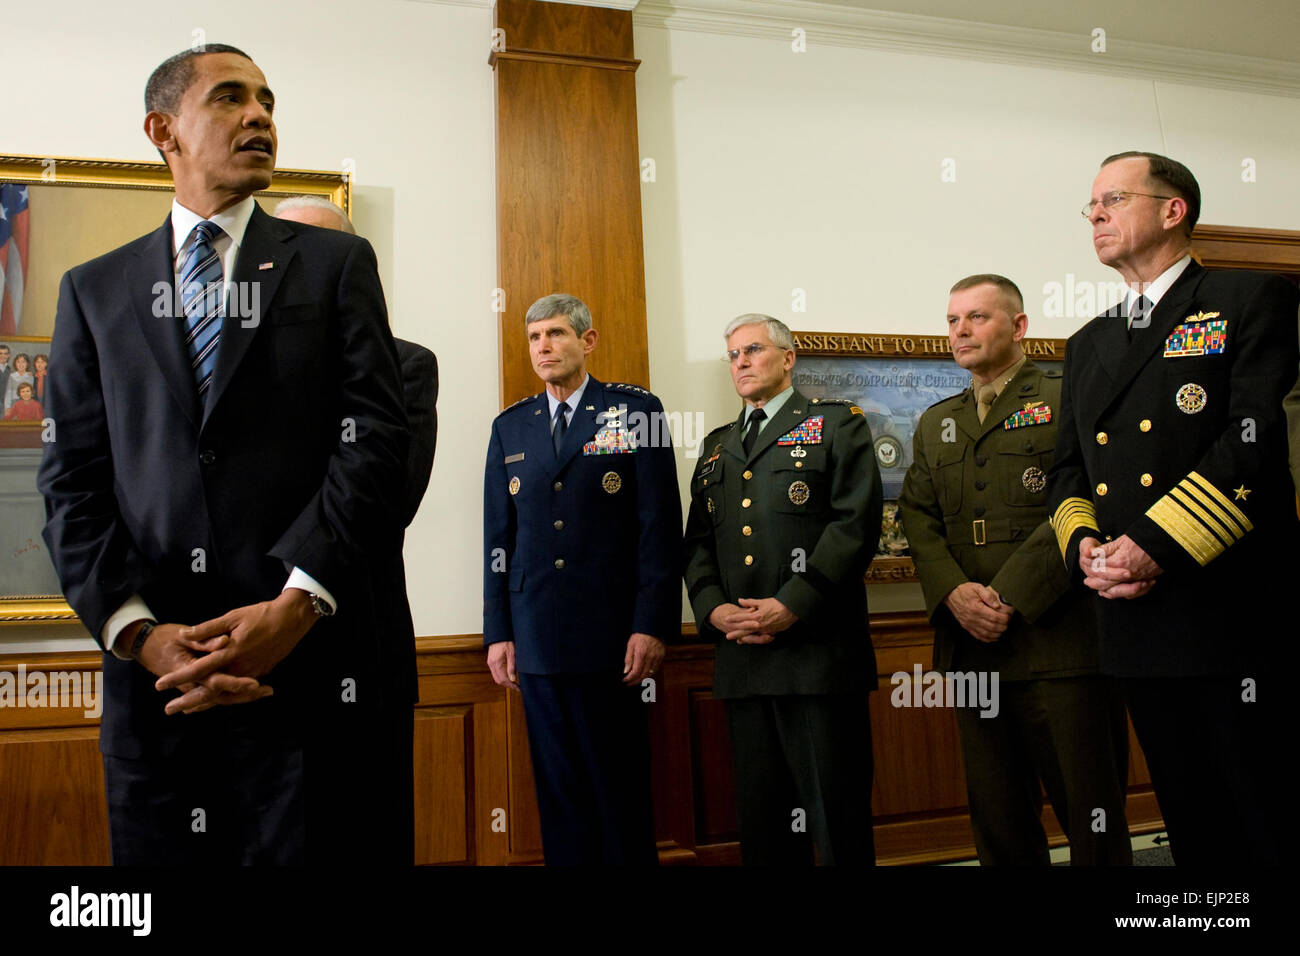 President of the United States Barack Obama, flanked by Gen. Norton Schwartz, U.S. Air Force chief of staff; Gen. George W. Casey, U.S. Army chief of staff; U.S. Marine Gen. James E. Cartwright, vice chairman of the Joint Chiefs of Staff and U.S. Navy Adm. Mike Mullen, chairman of the joint chiefs of staff, addresses the media during his first visit to the Pentagon since becoming commander-in-chief, Jan. 28, 2009. Obama and Vice President Joe Biden met with Secretary of Defense Robert M. Gates and all the service chiefs getting their inputs on the way ahead in Afghanistan and Iraq.  Mass Commu Stock Photo